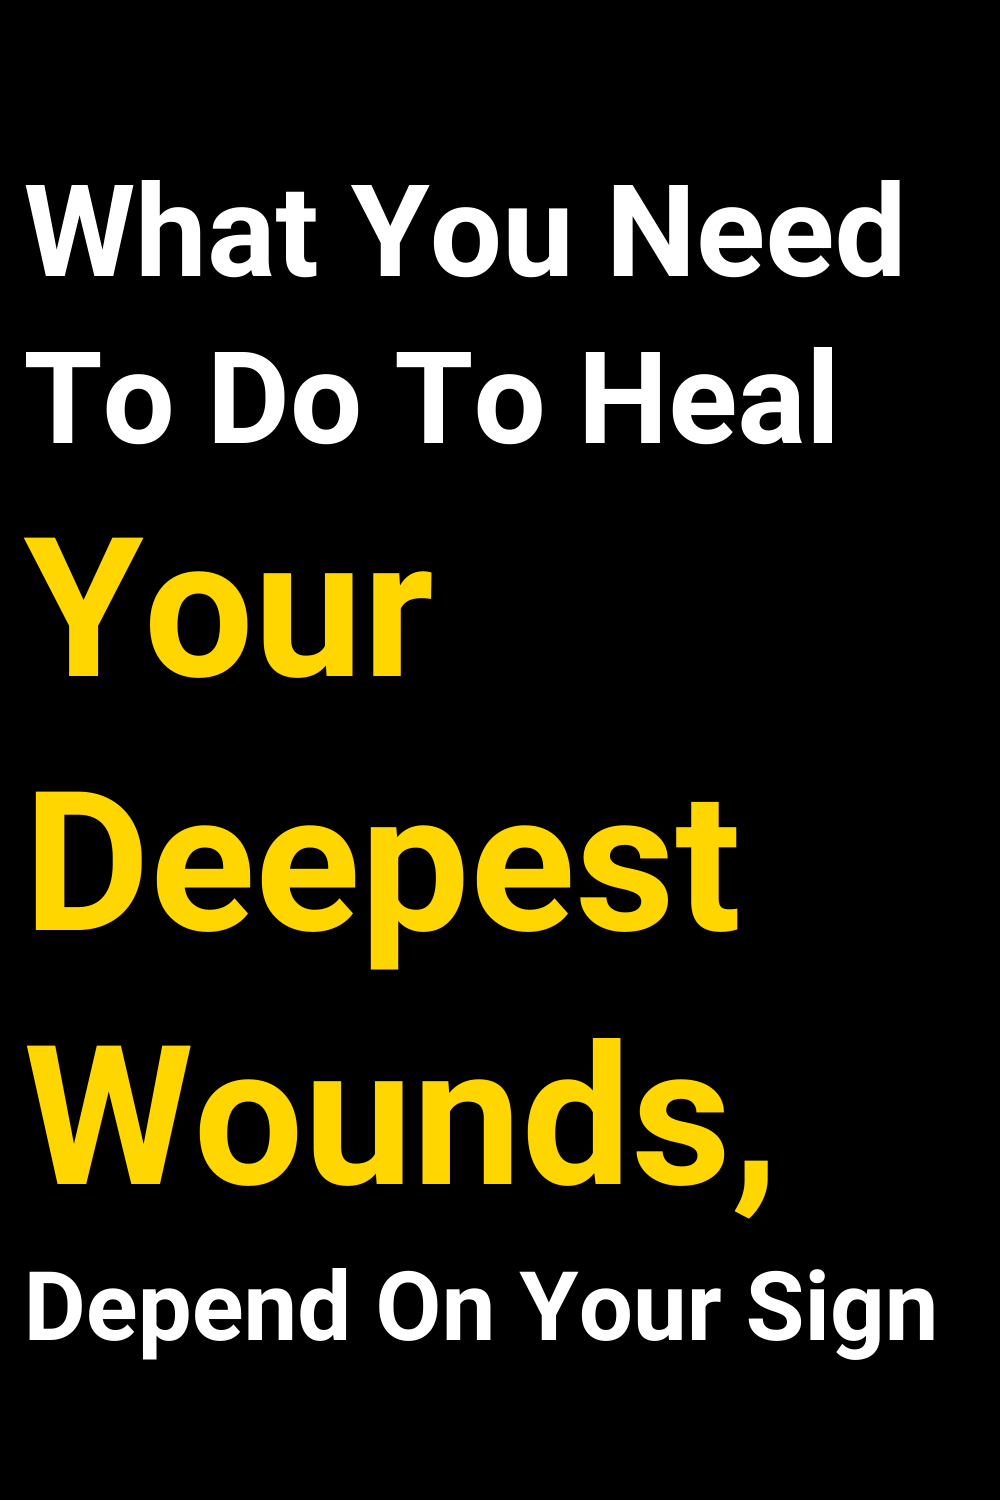 What You Need To Do To Heal Your Deepest Wounds, Depend On Your Sign